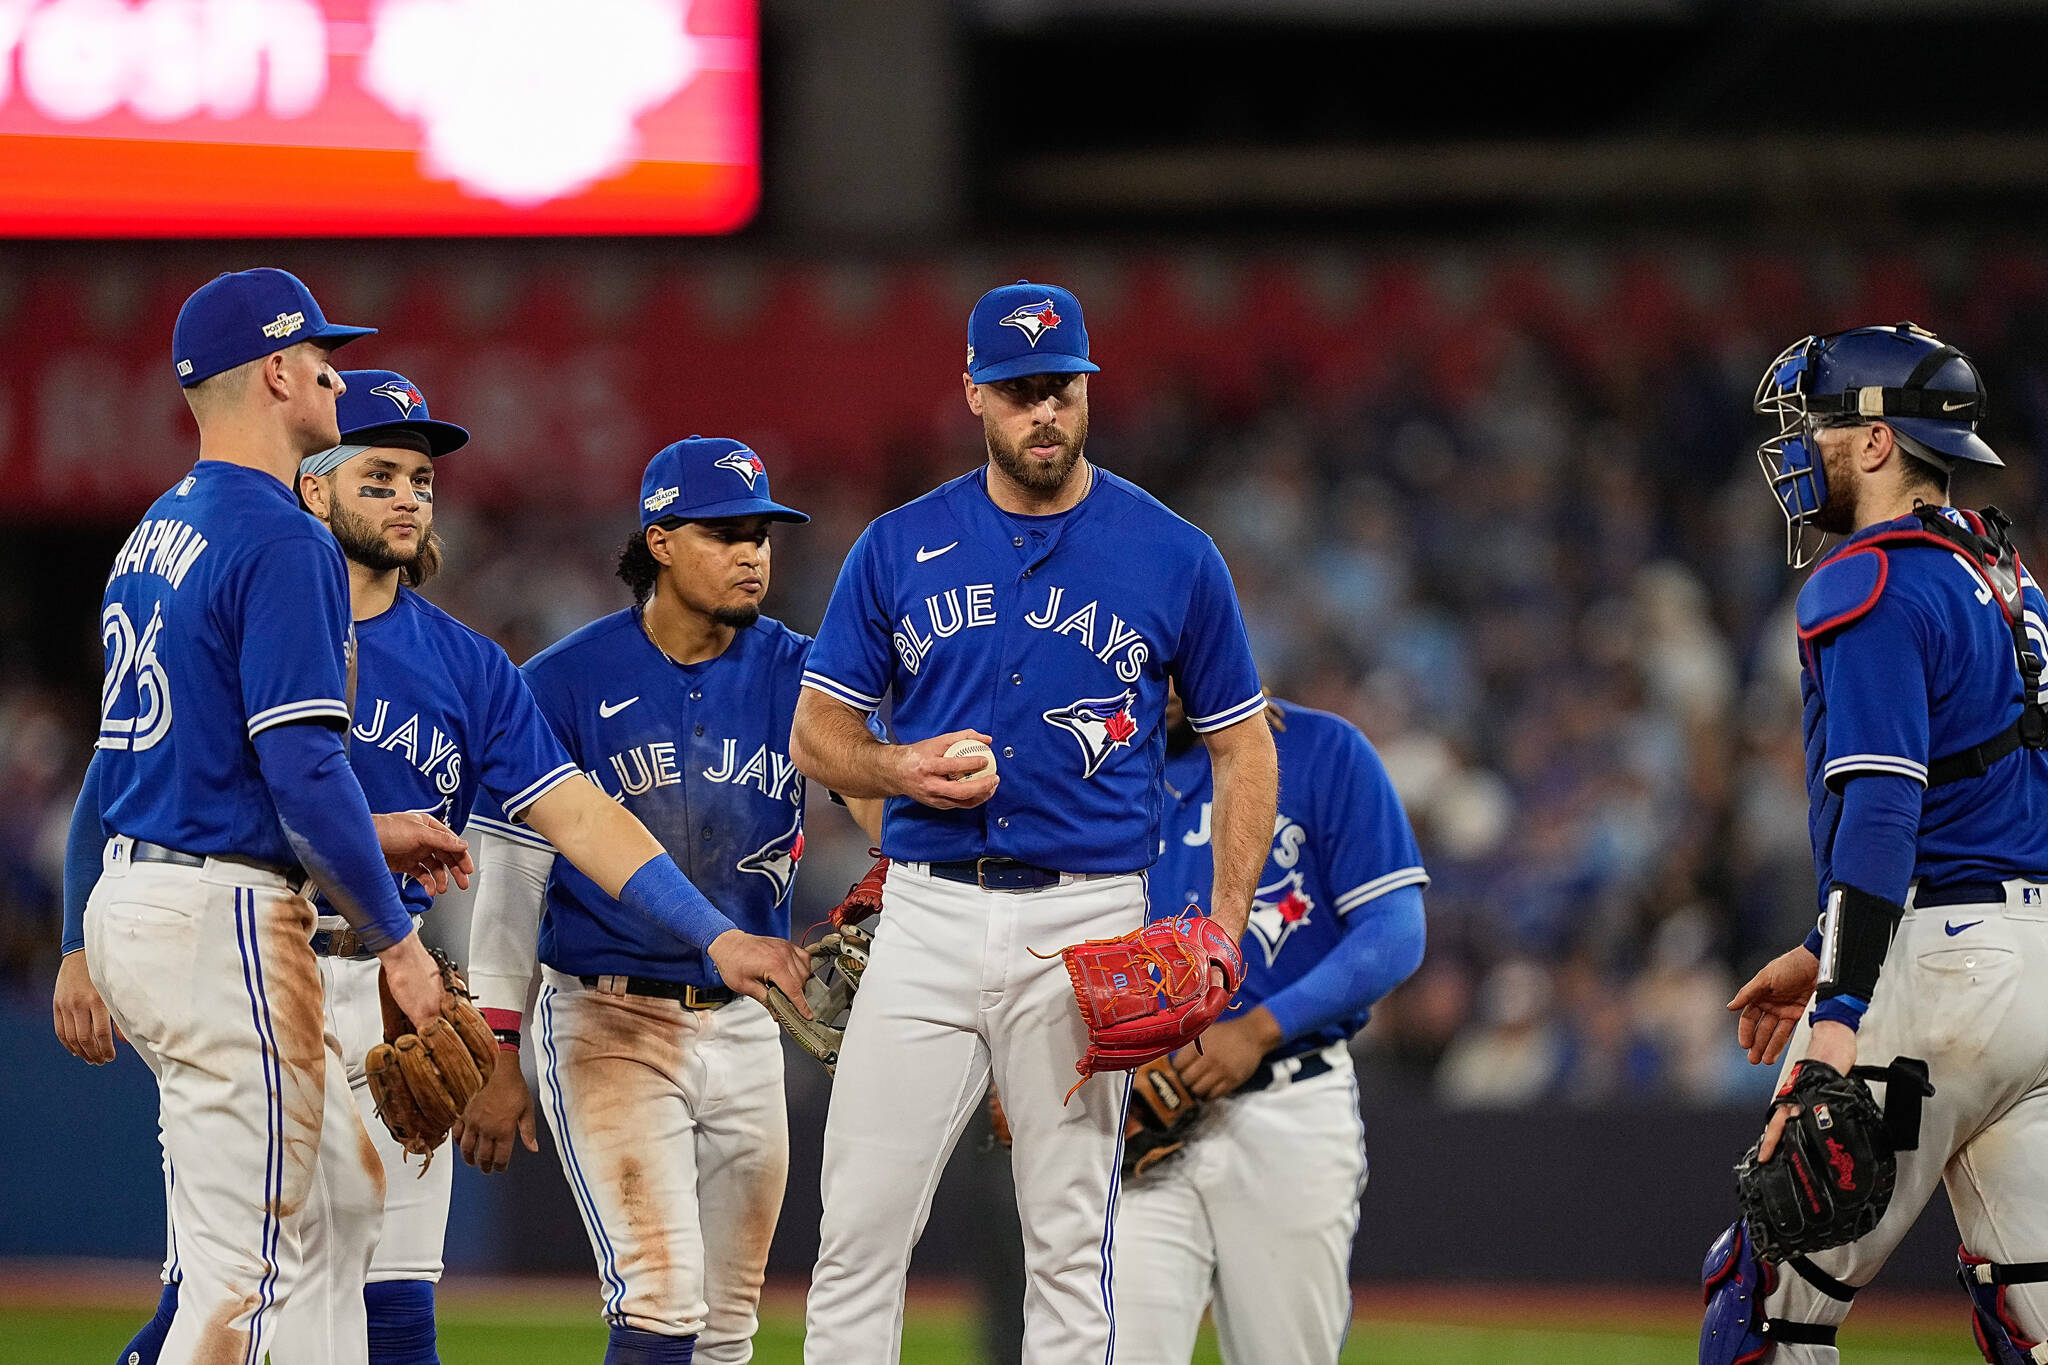 Blue Jays pitcher Anthony Bass apologizes for posting anti-LGBTQ